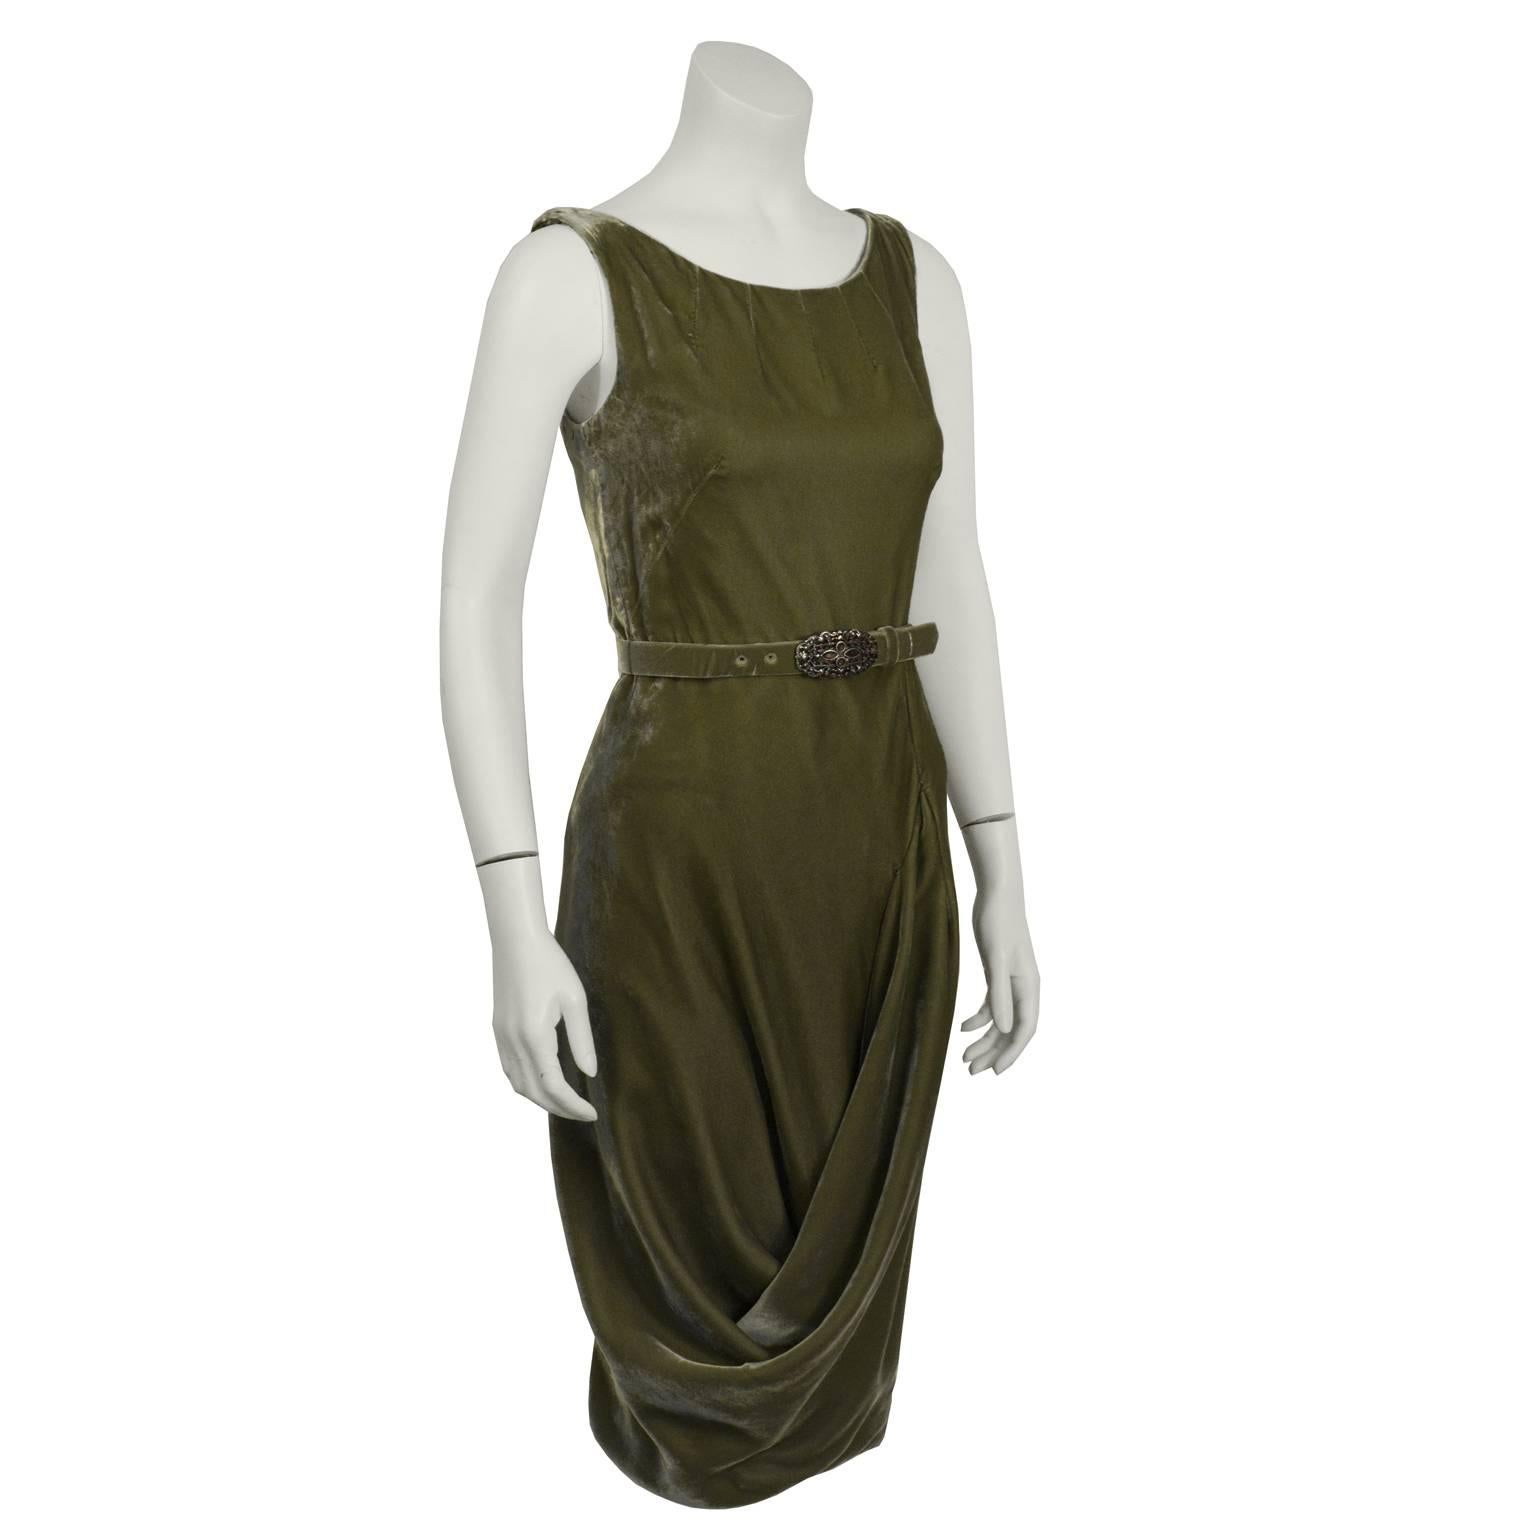 Gorgeous Alexander Mcqueen green velvet dress from the 1990s. Features a waist belt with a silver ornamented buckle and  a lovely draped skirt. Back zip closure. Excellent vintage condition. Fits like a US 6. 